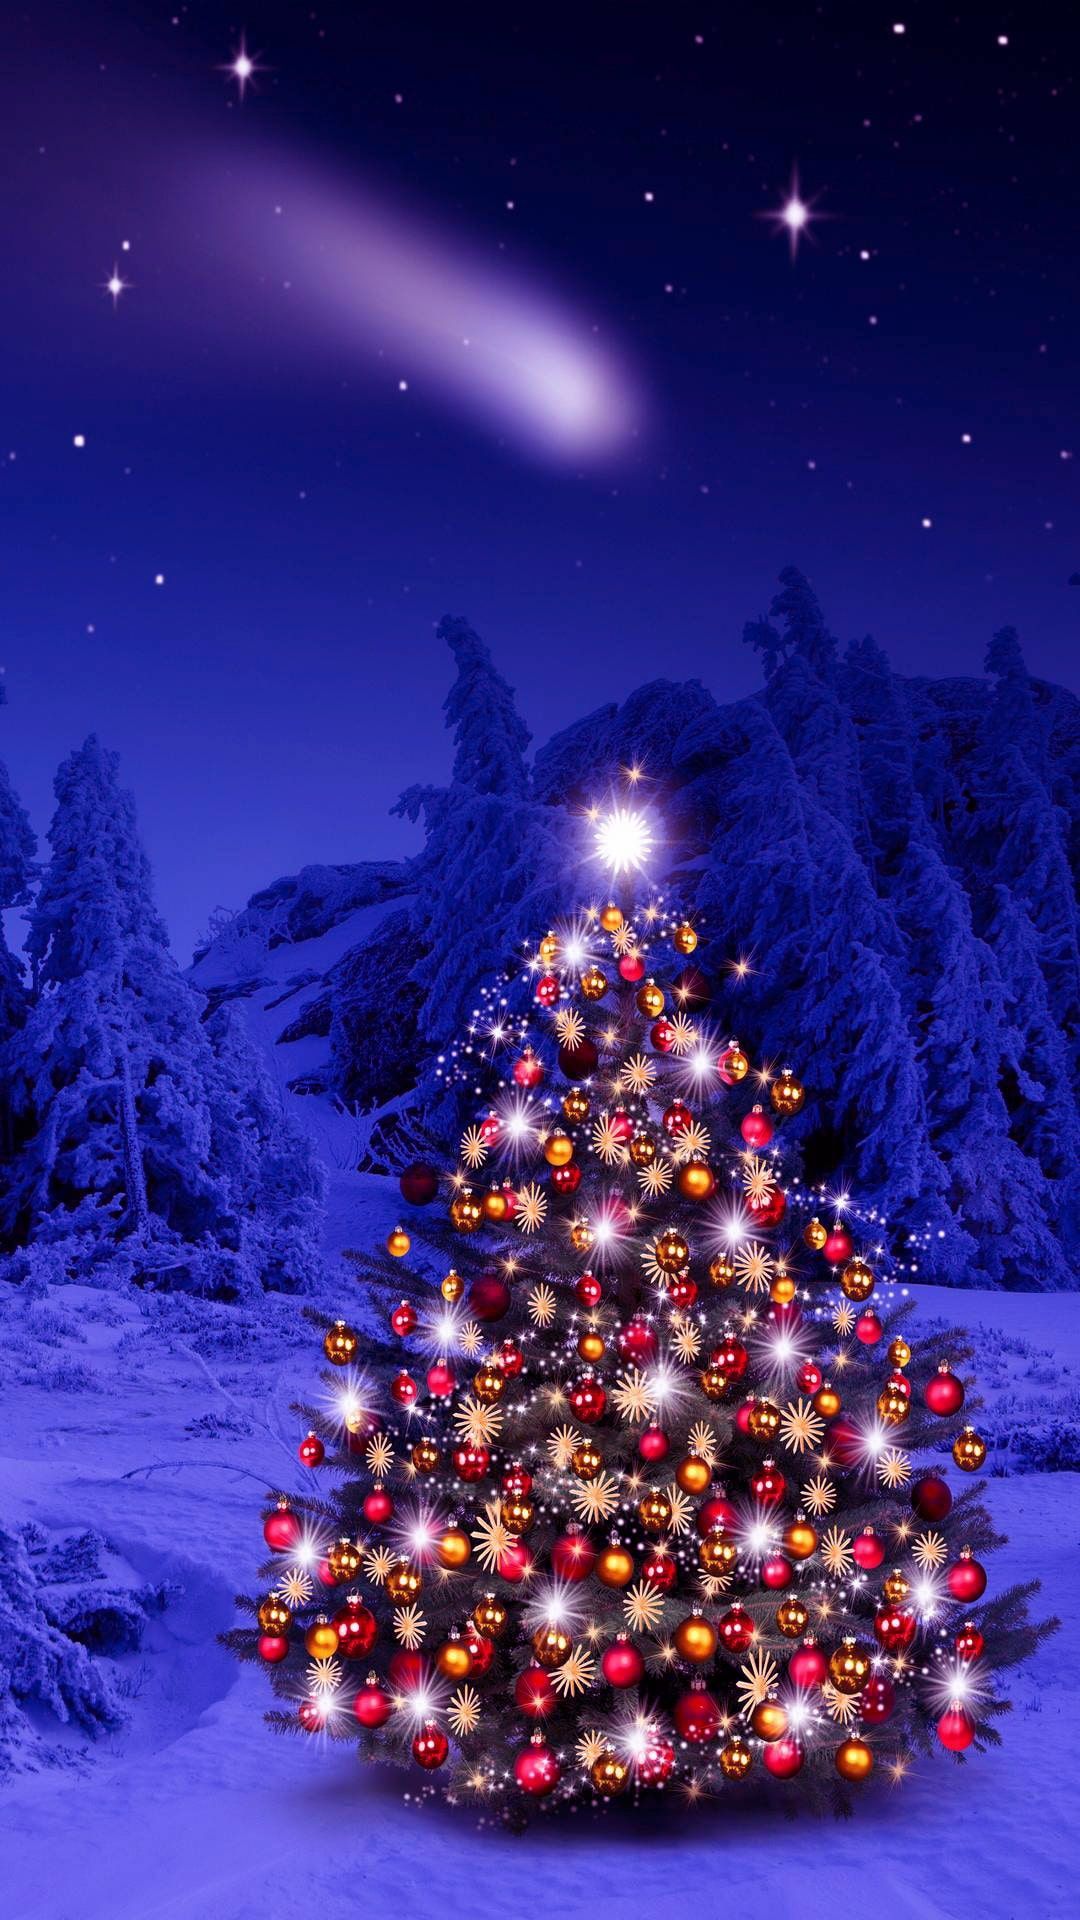 A beautiful wallpaper of a Christmas tree in the snow - Christmas iPhone